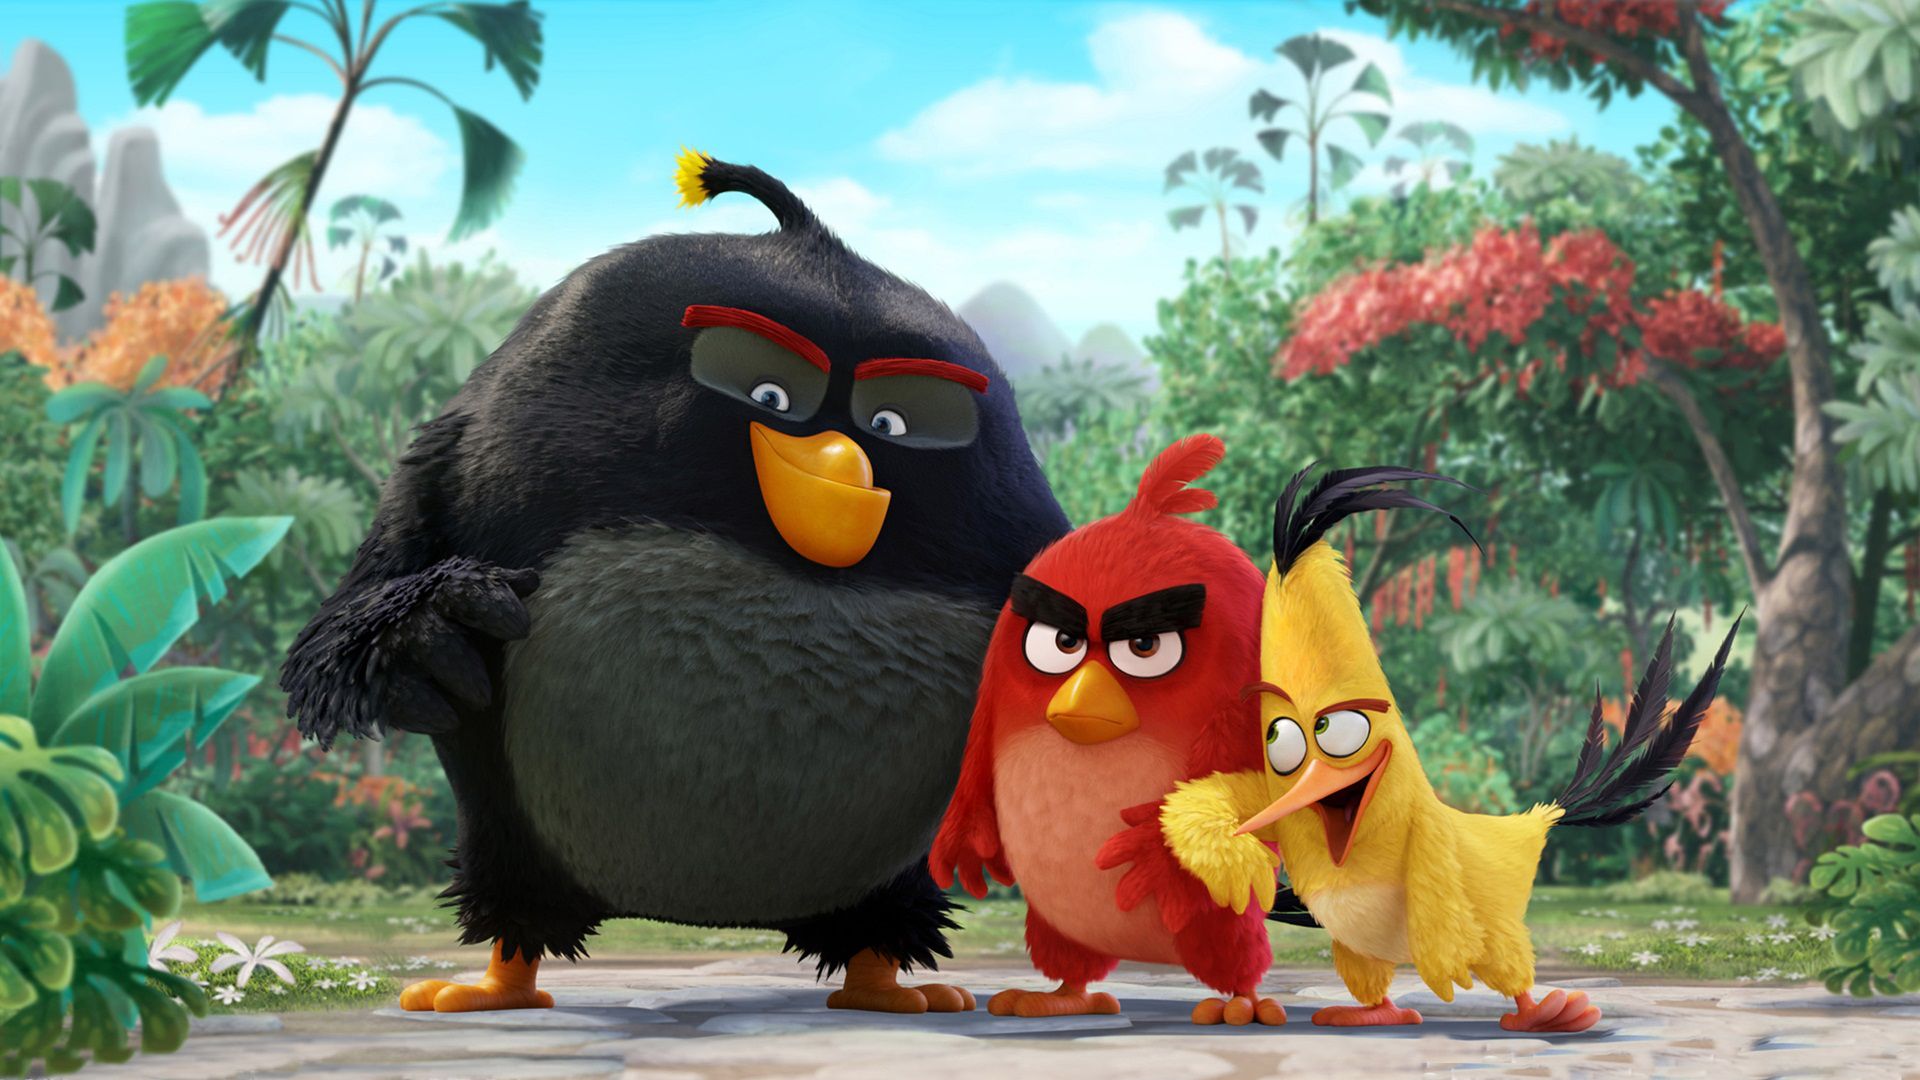 Watch The Angry Birds Movie Trailer Here